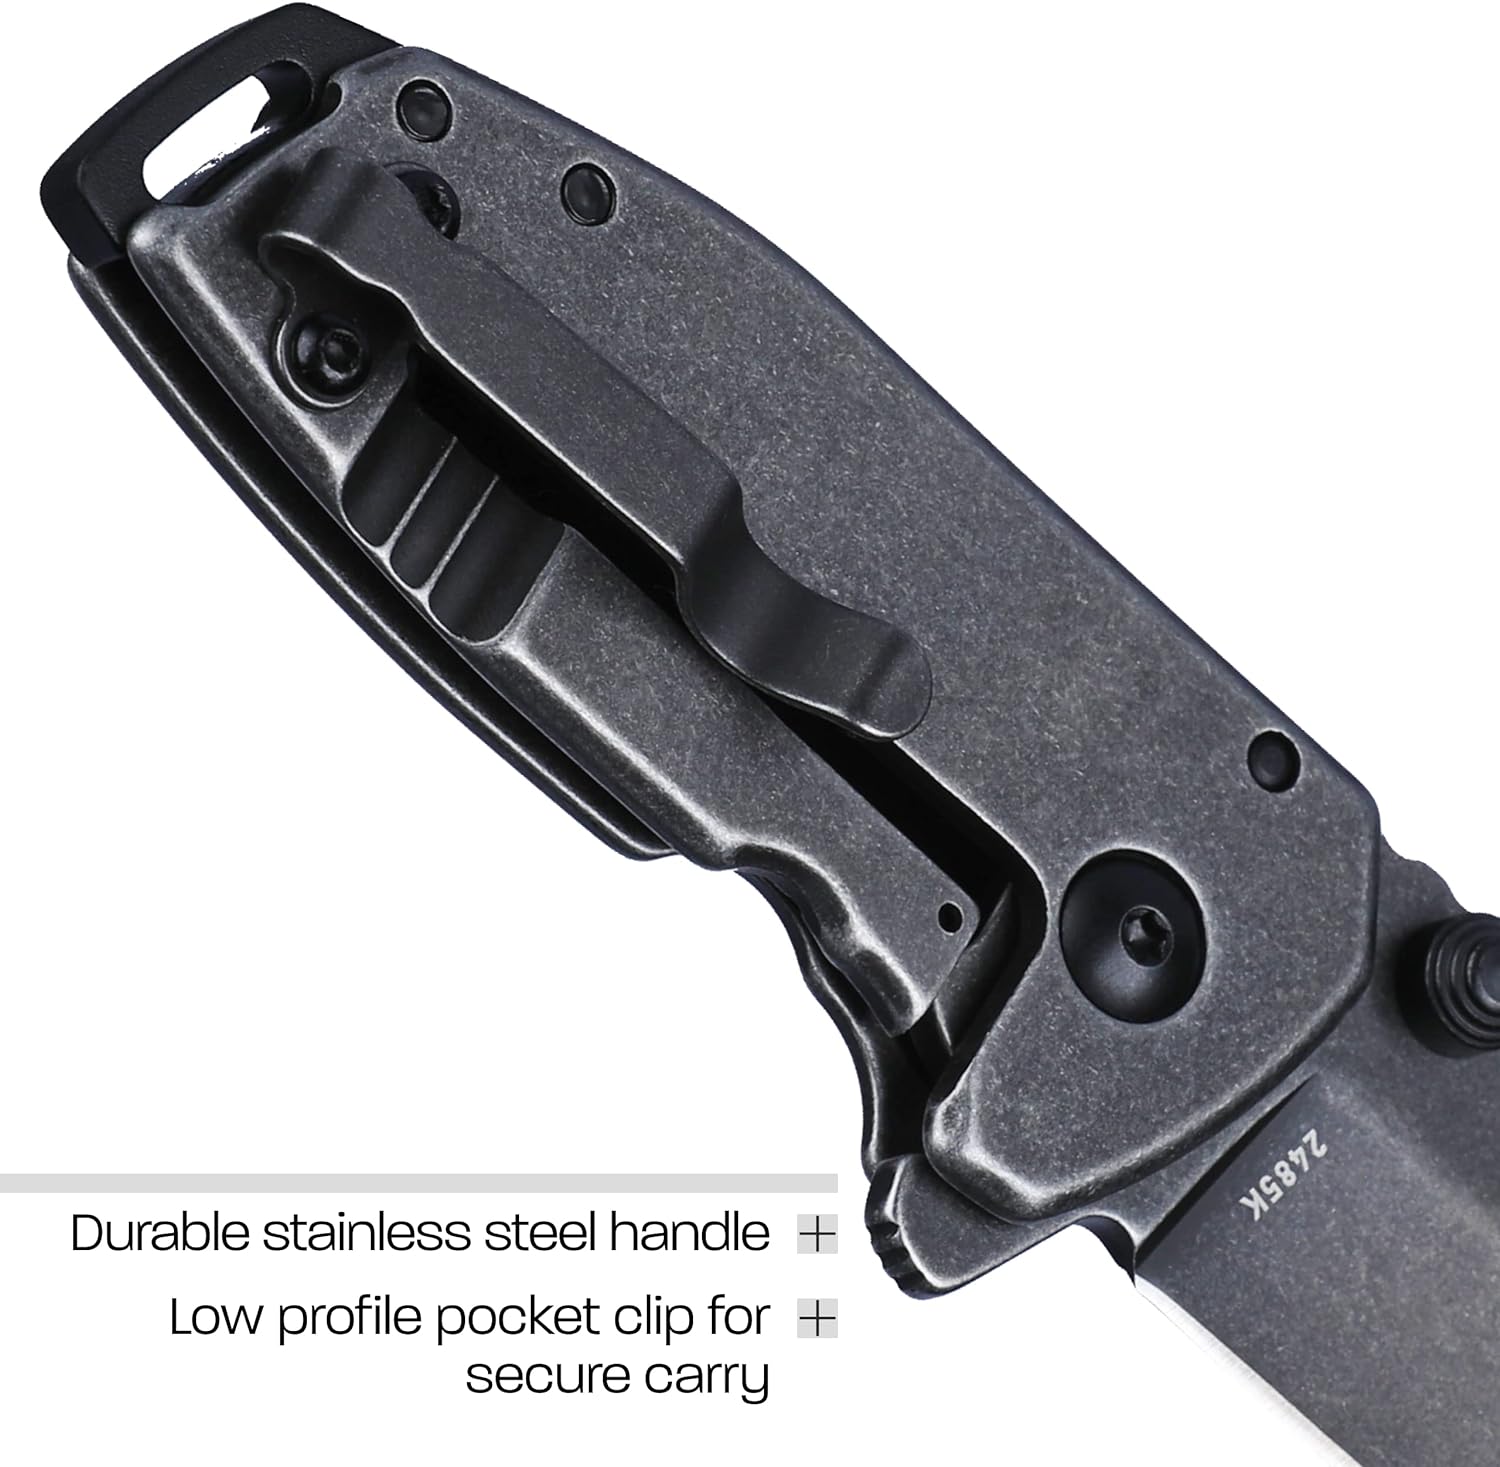 Squid™ Compact pocket knife